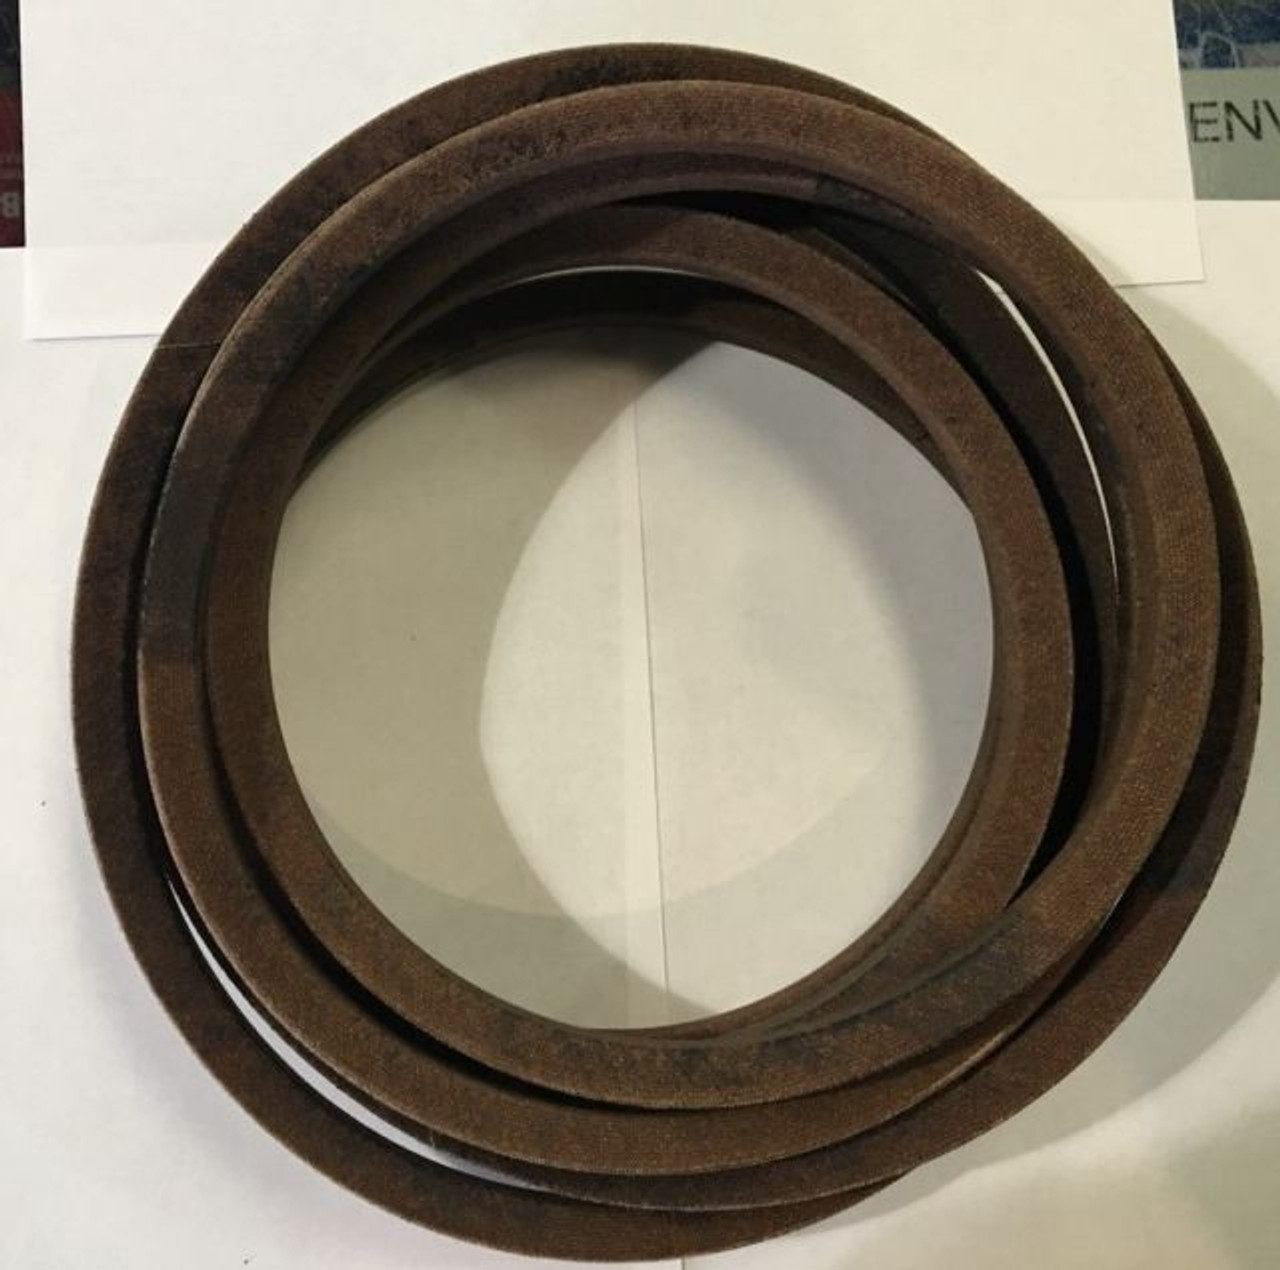 Toro 72" Primary Deck Belt 109-8070
Where Used: Part Number 109-8070
Model Name Diagram
130-8473, 72in MVP Kit, Z Master Professional Rear-Discharge Riding Mower MVP KIT NO. 130-8473
74944, Z Master Professional 5000 Series Riding Mower, with 72in TURBO
FORCE Rear Discharge Mower, 2014 (SN 314000001-31499999
DECK ASSEMBLY
74944, Z Master Professional 5000 Series Riding Mower, with 72in TURBO
FORCE Rear Discharge Mower, 2015 (SN 315000001-31599999
DECK ASSEMBLY
74944, Z Master Professional 5000 Series Riding Mower, with 72in TURBO
FORCE Rear Discharge Mower, 2016 (SN 316000001-31699999
DECK ASSEMBLY
74945, Z Master Professional 5000 Series Riding Mower, with 72in TURBO
FORCE Rear Discharge Mower, 2017 (SN 400000000-40179999
DECK ASSEMBLY